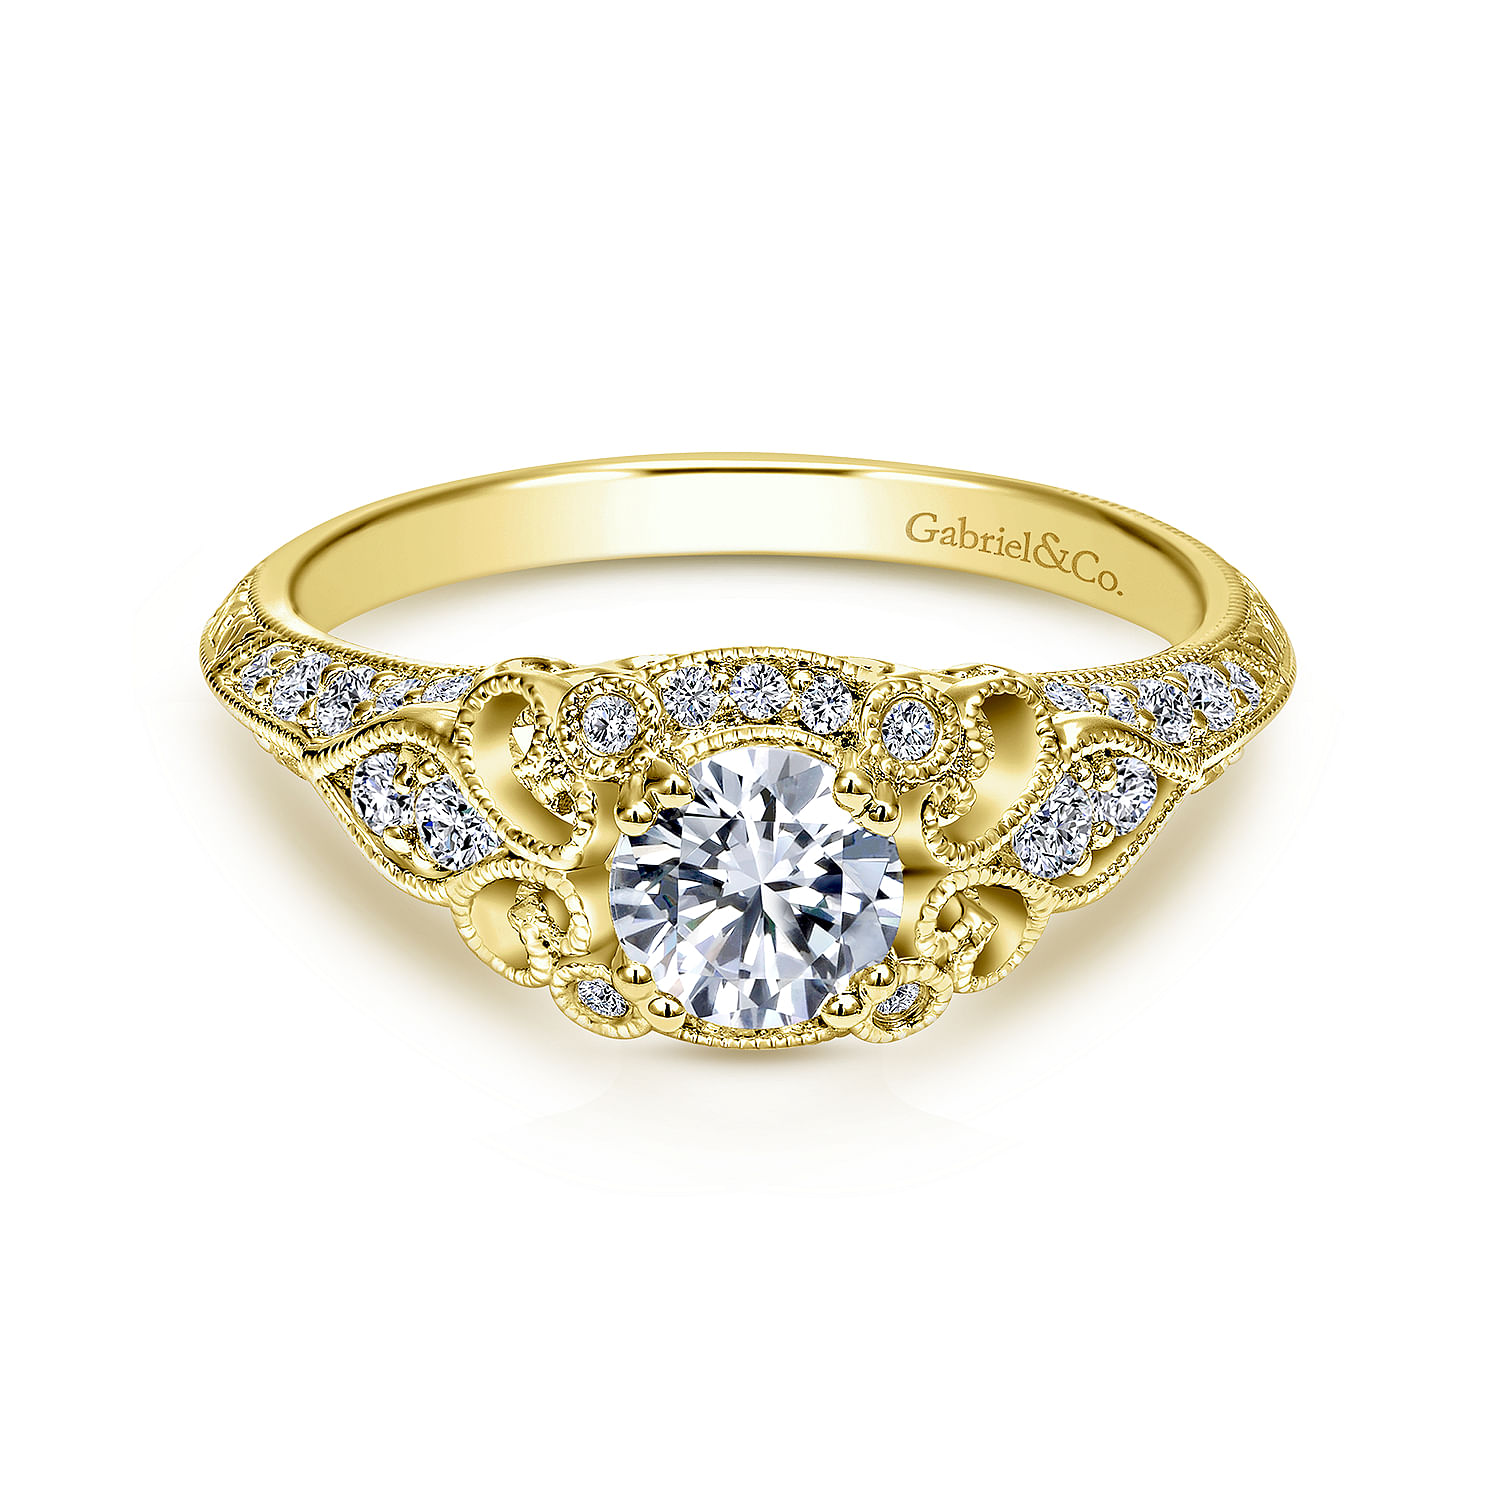 Abel - Unique 14K Yellow Gold Vintage Inspired Diamond Halo Engagement Ring